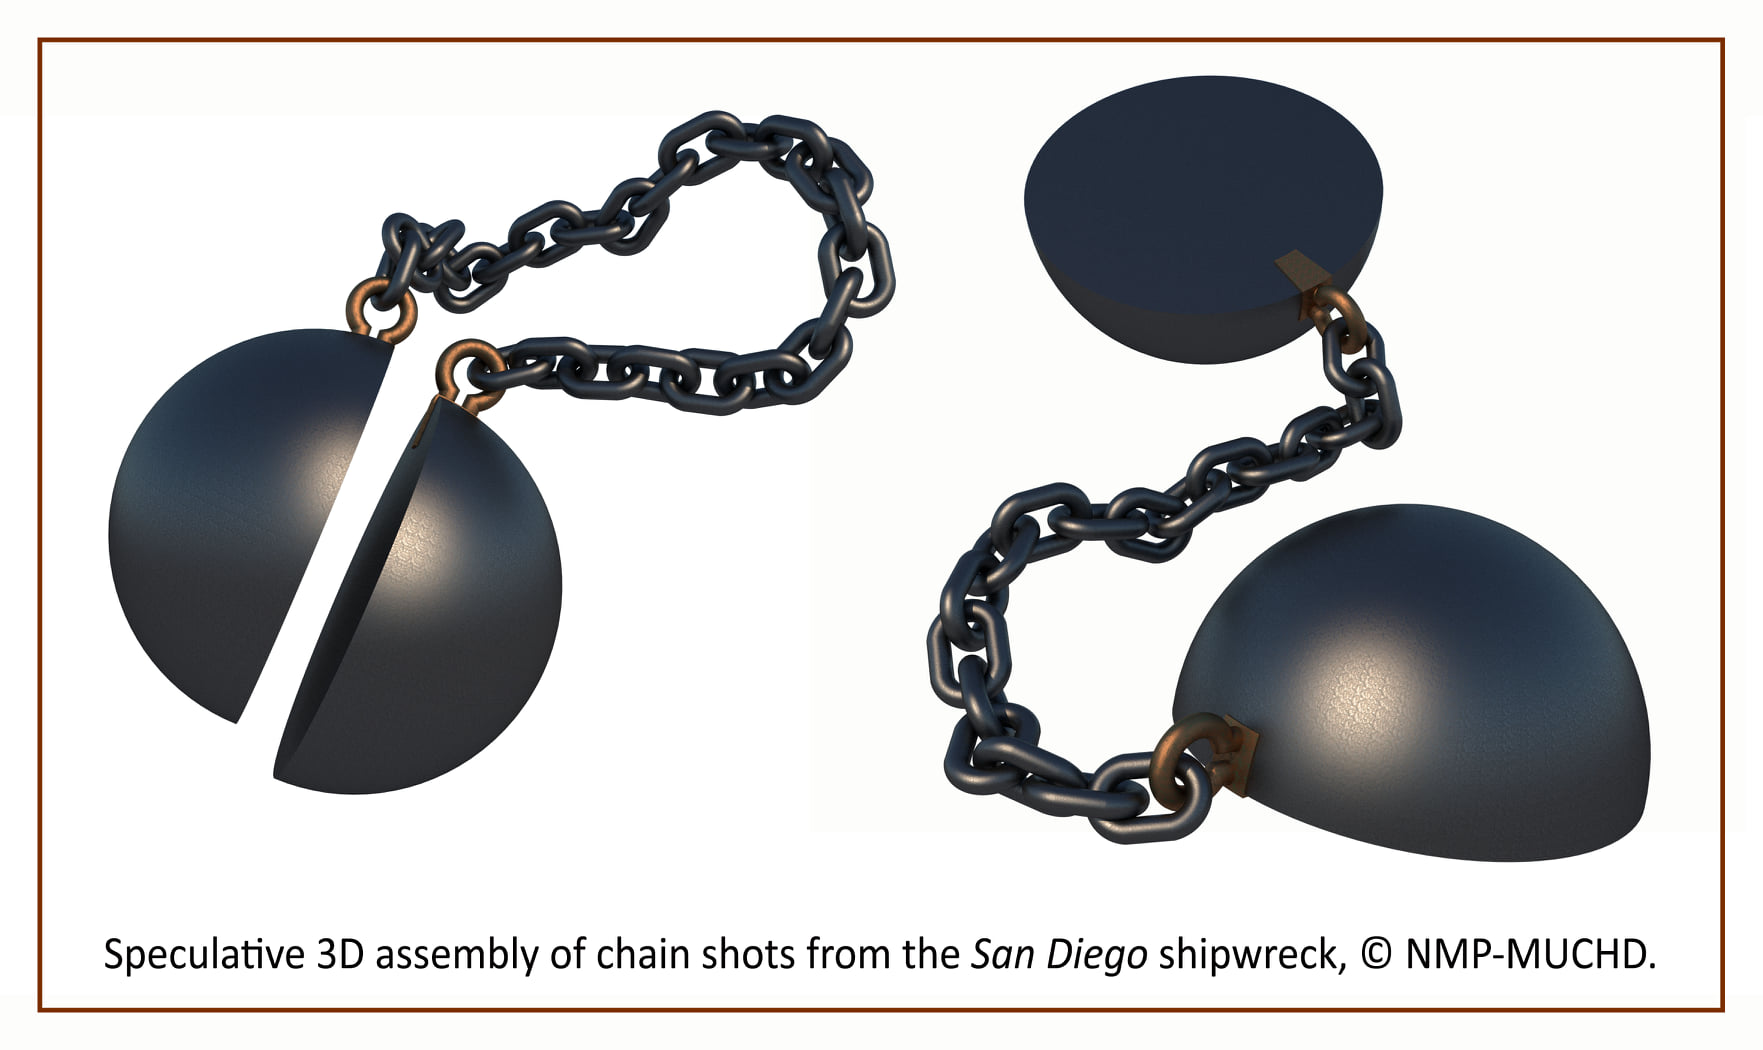 Speculative 3D assembly of chain shots from San Diego shipwreck